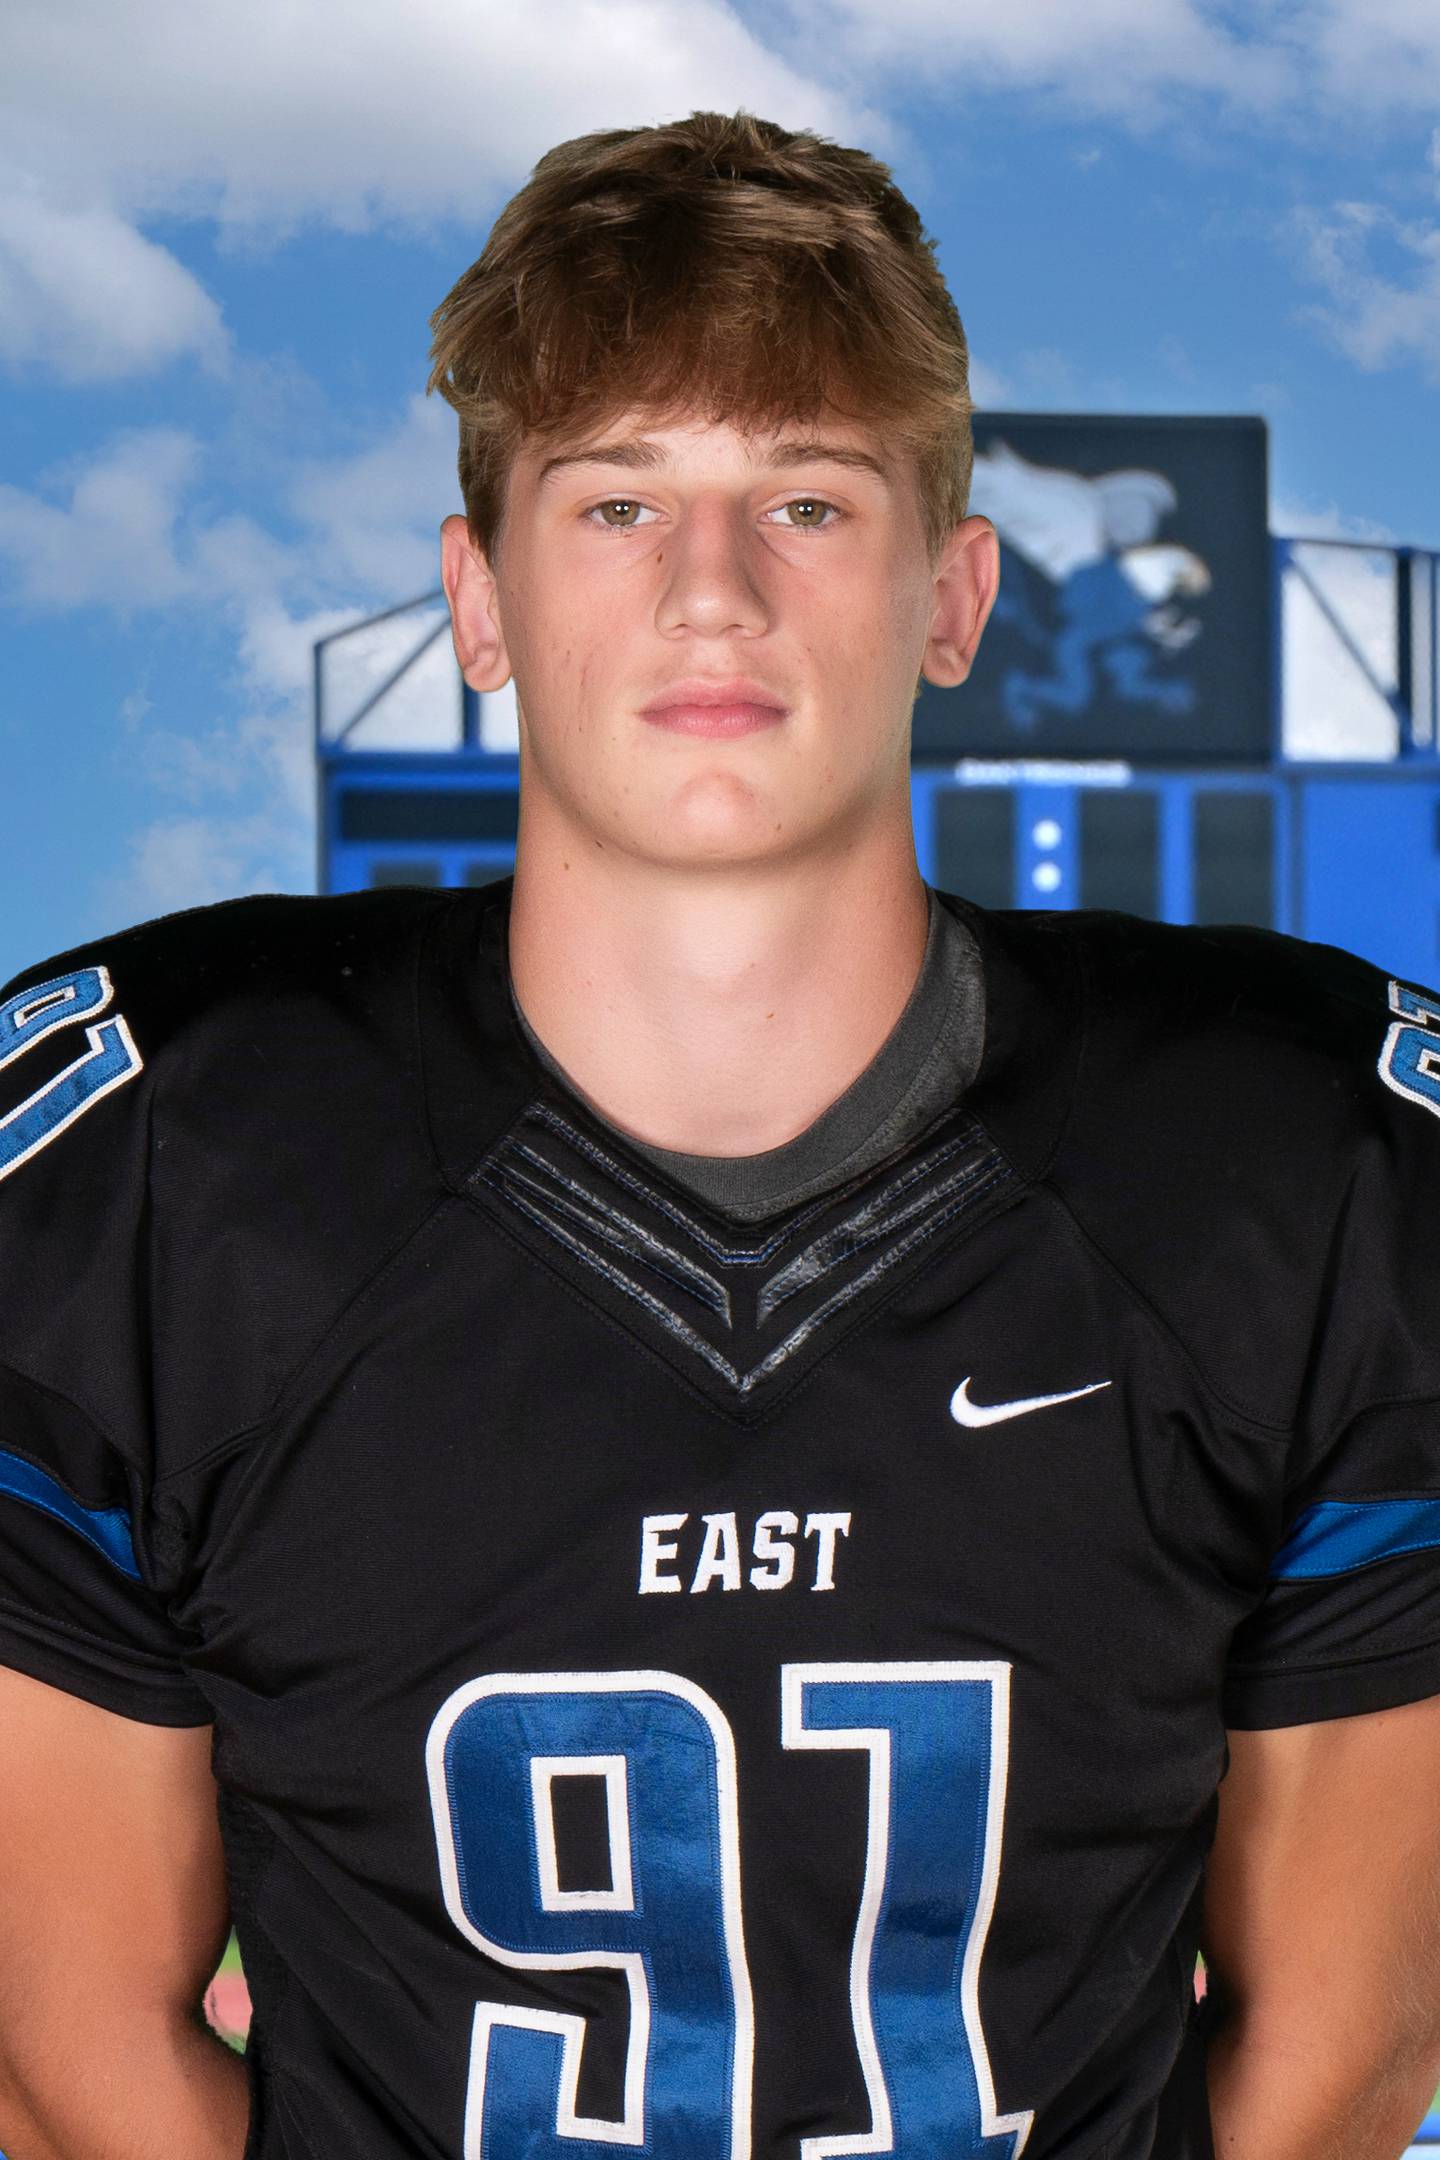 Lincoln-Way East's Caden O'Rourke